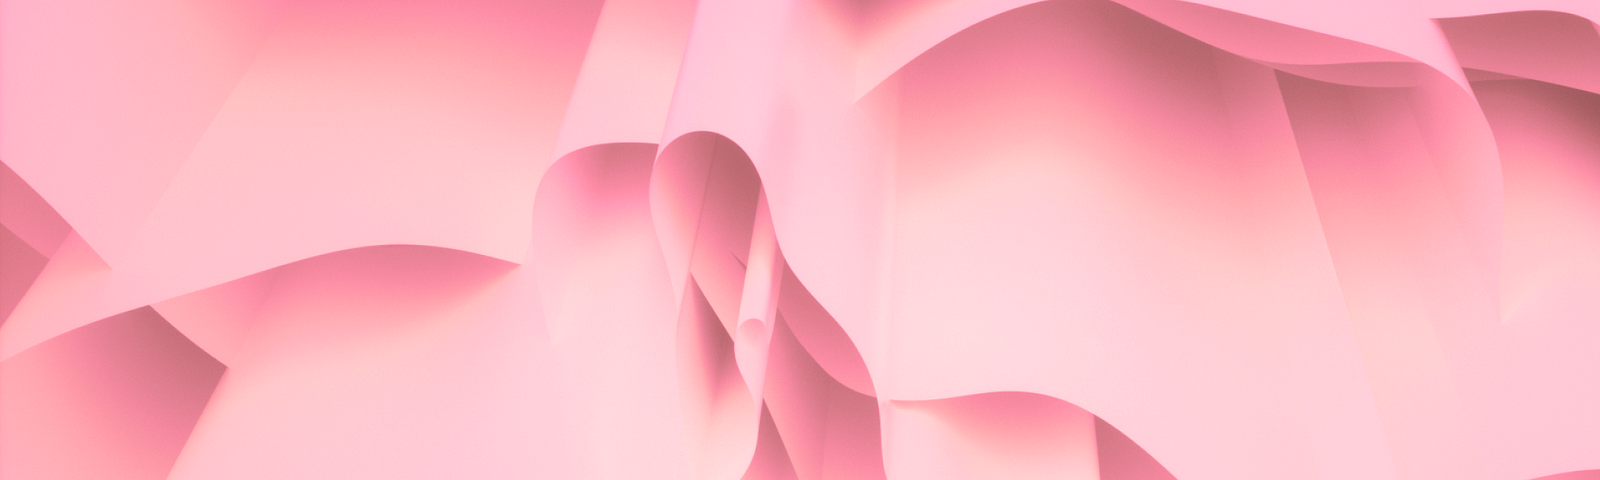 Abstract image of pink layers seen from below, similar to nothern lights